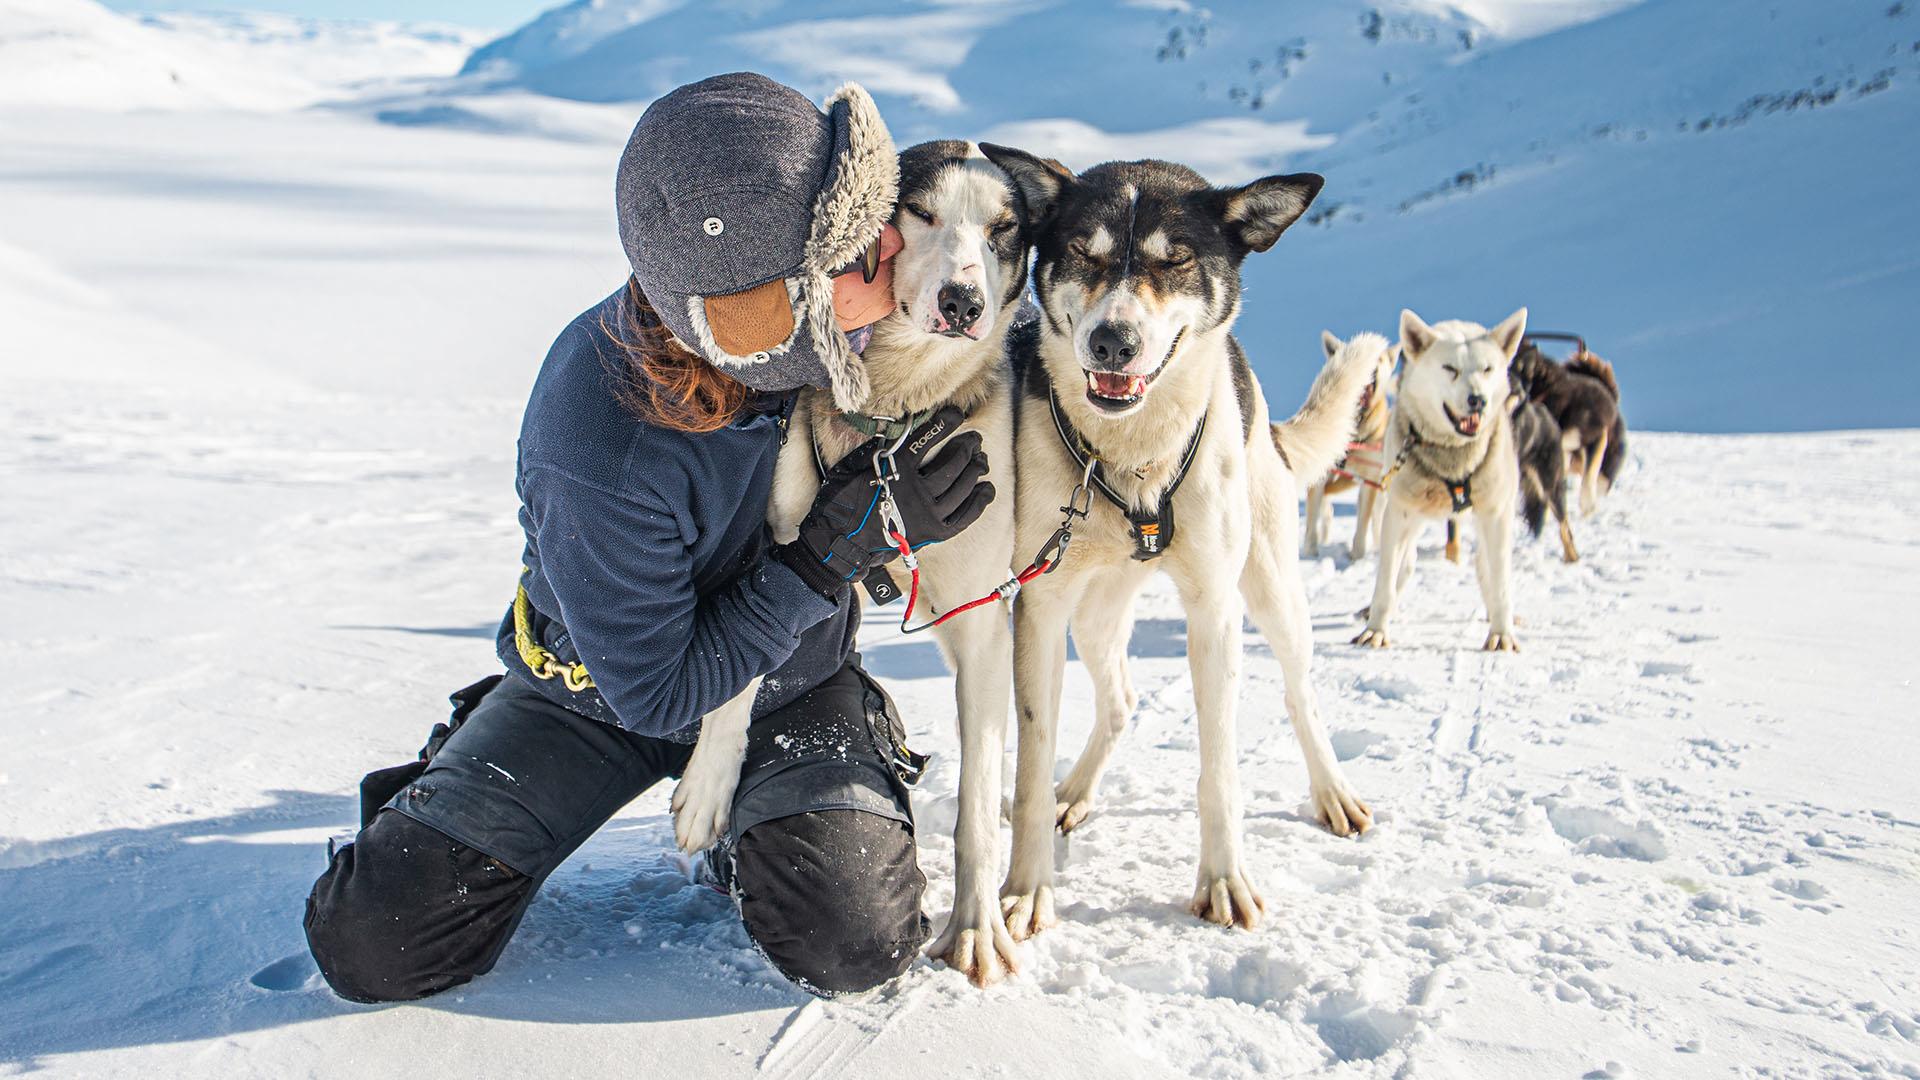 During a break on a dog sledding trip in the mountains the driver kneels beside the leading dog pair and hugs them.